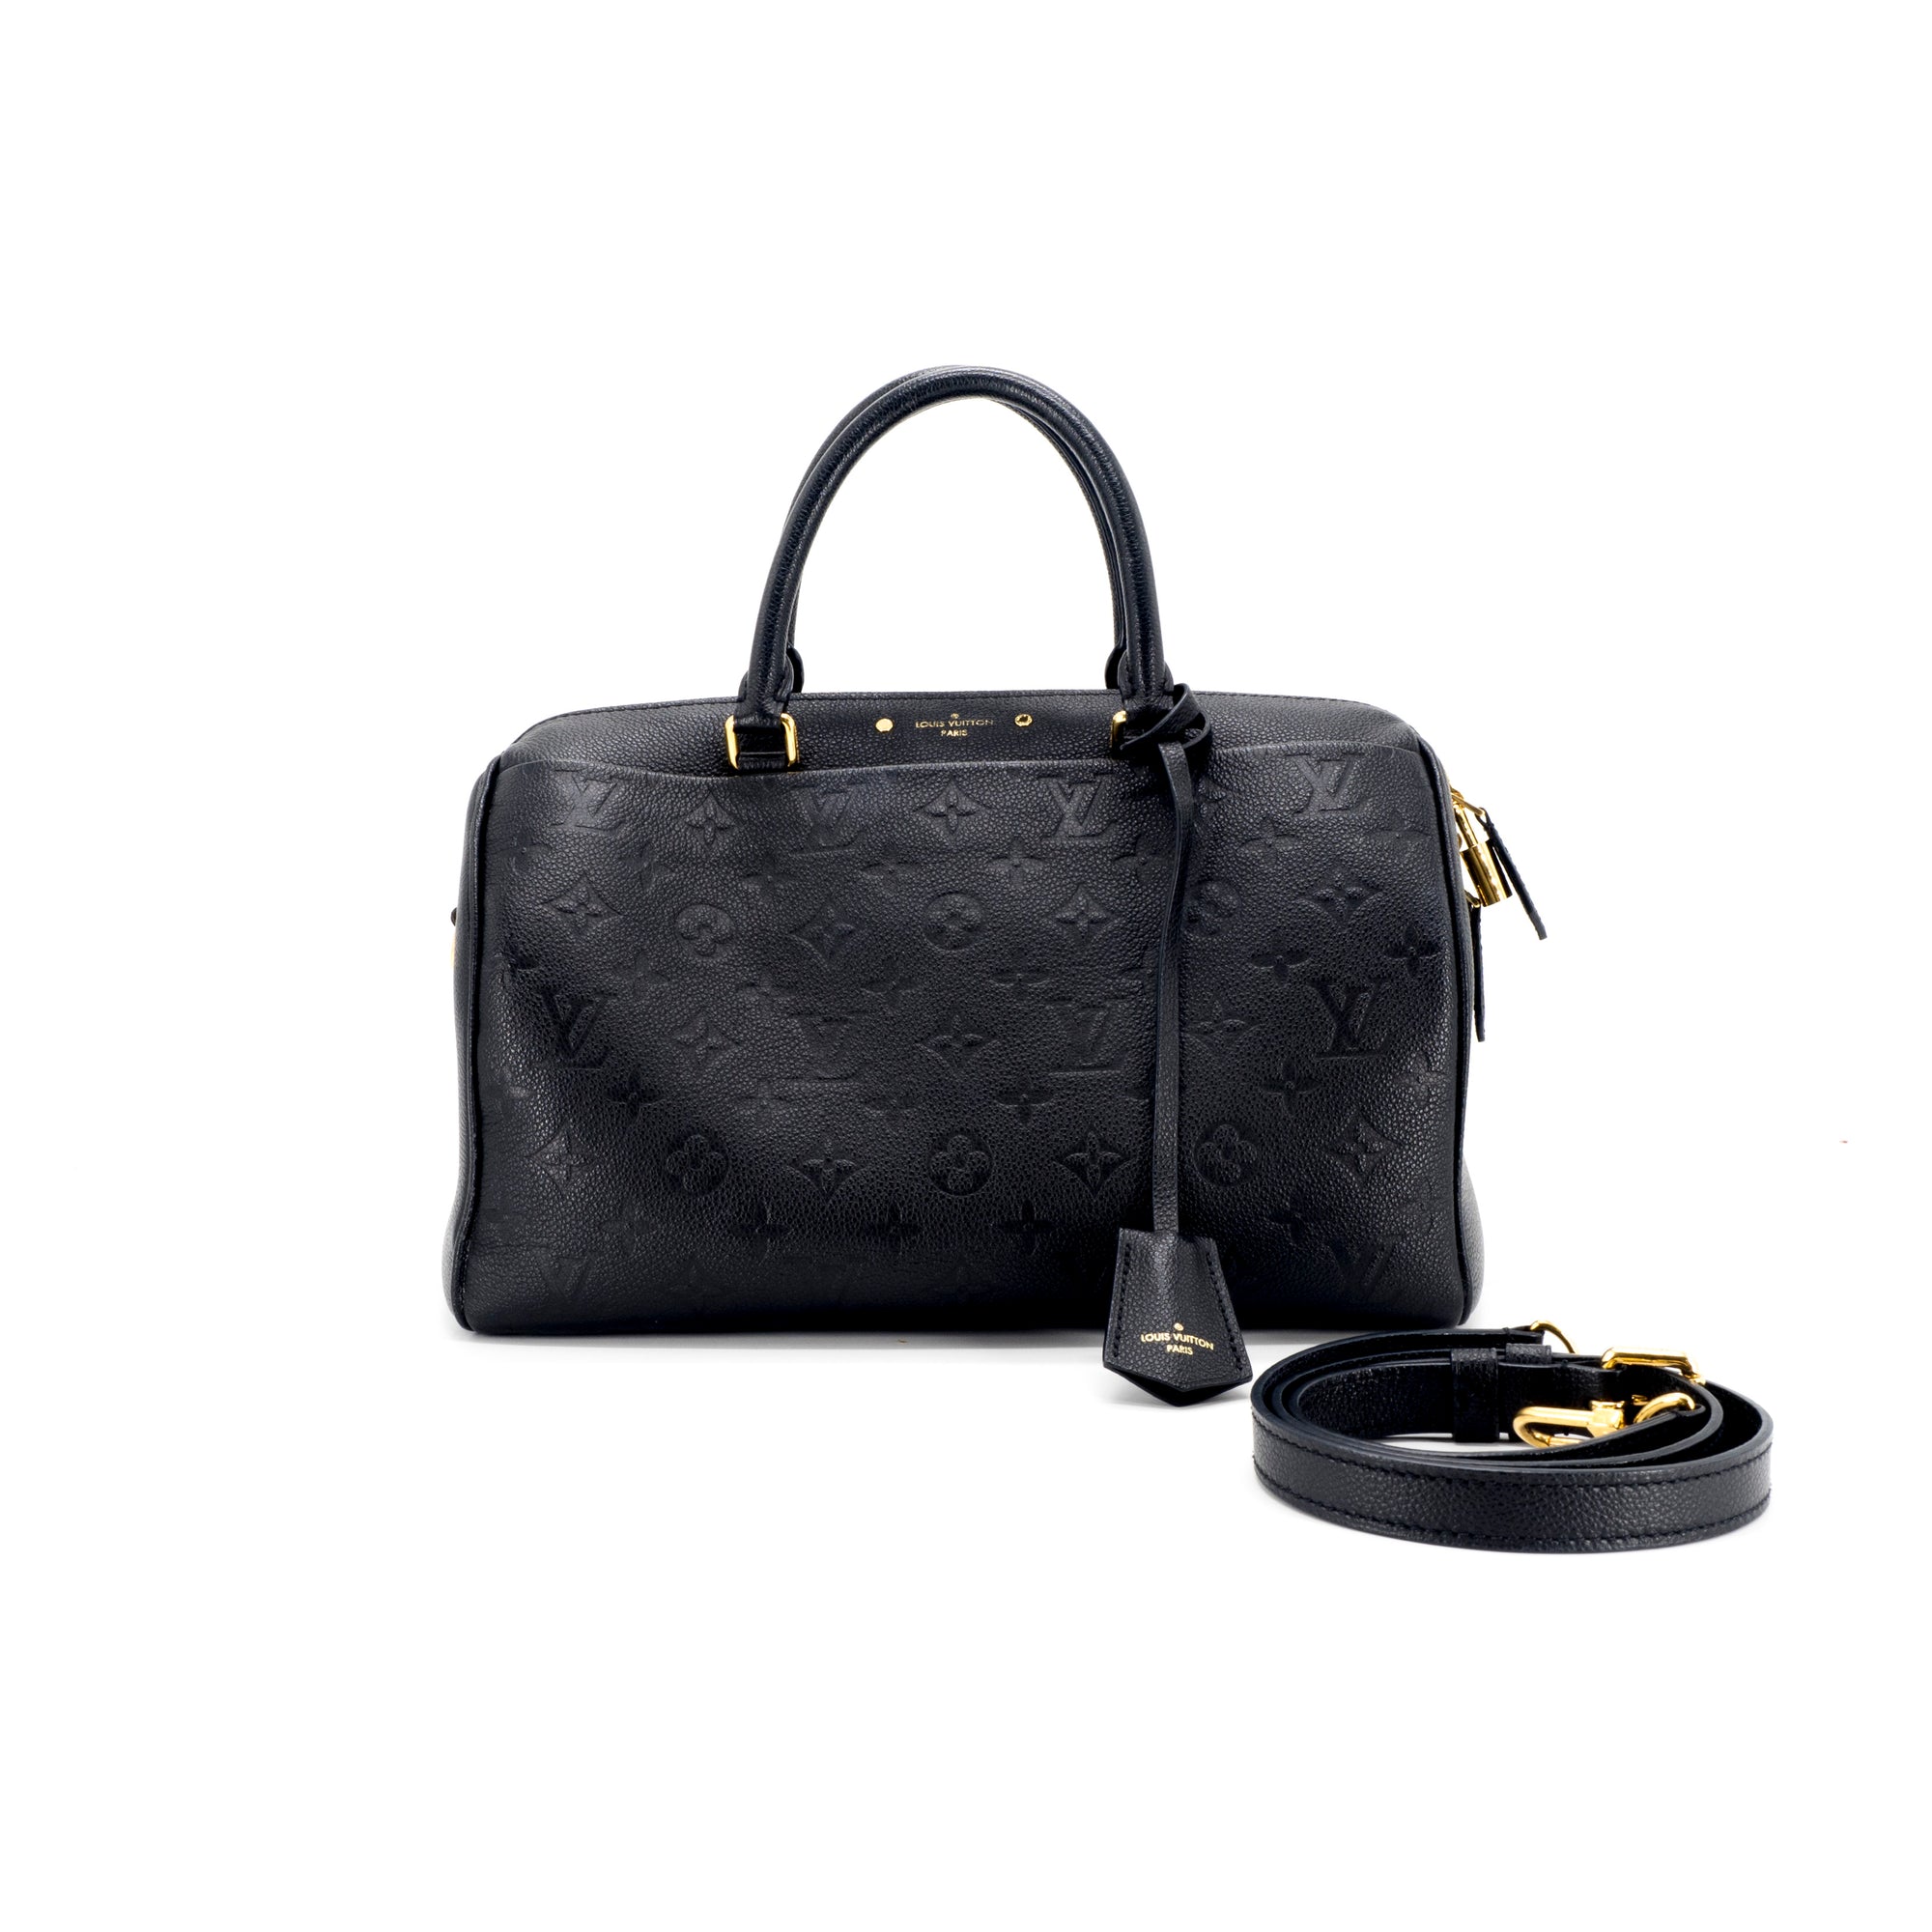 Bag Louis Vuitton Black in Synthetic - 30424432